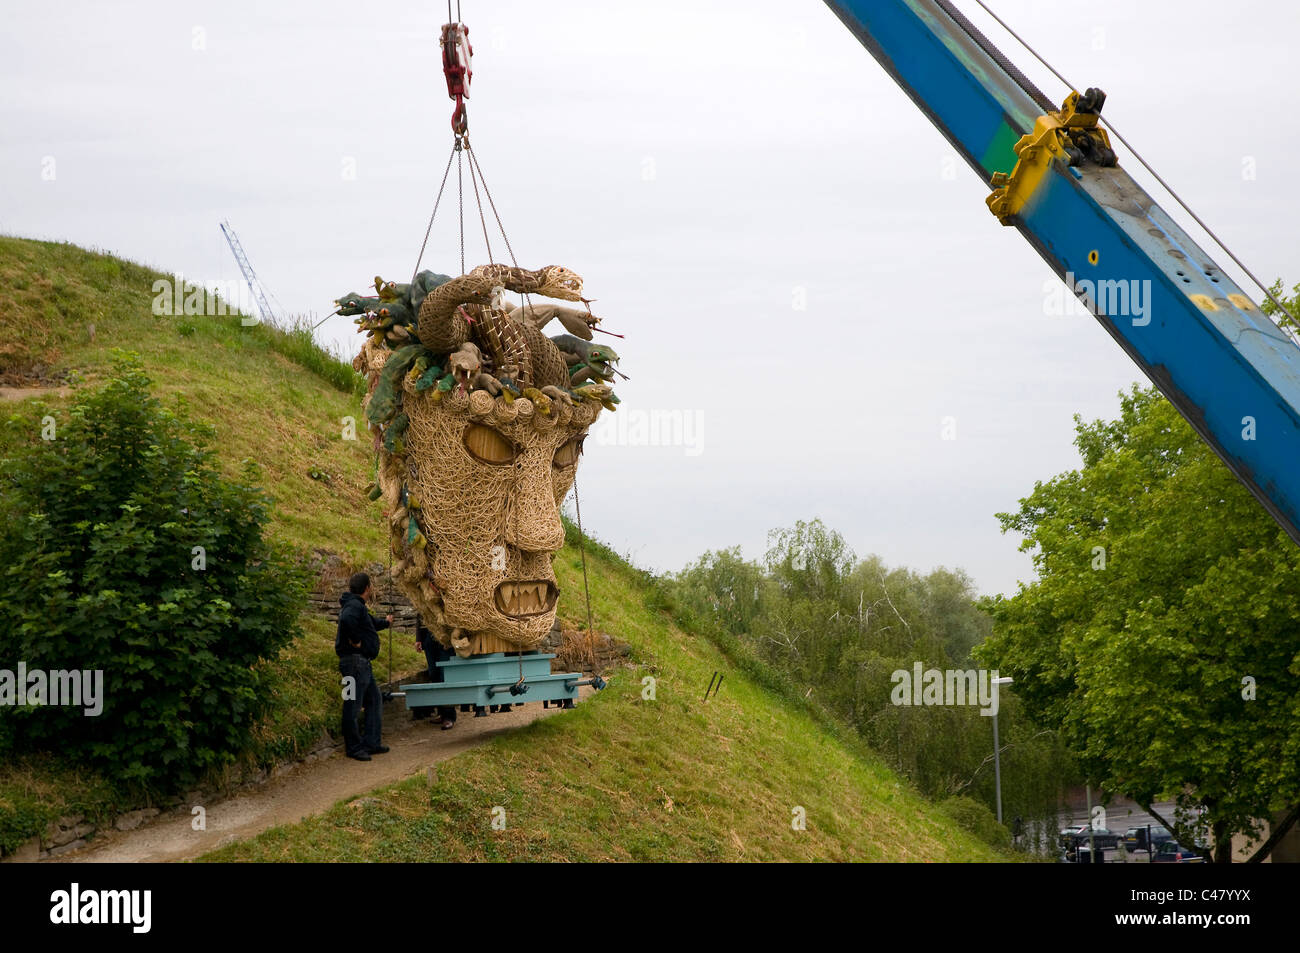 The head of a wicker man in the form of Medusa being craned onto the castle mound in Oxford. Raising money for Charity. Stock Photo